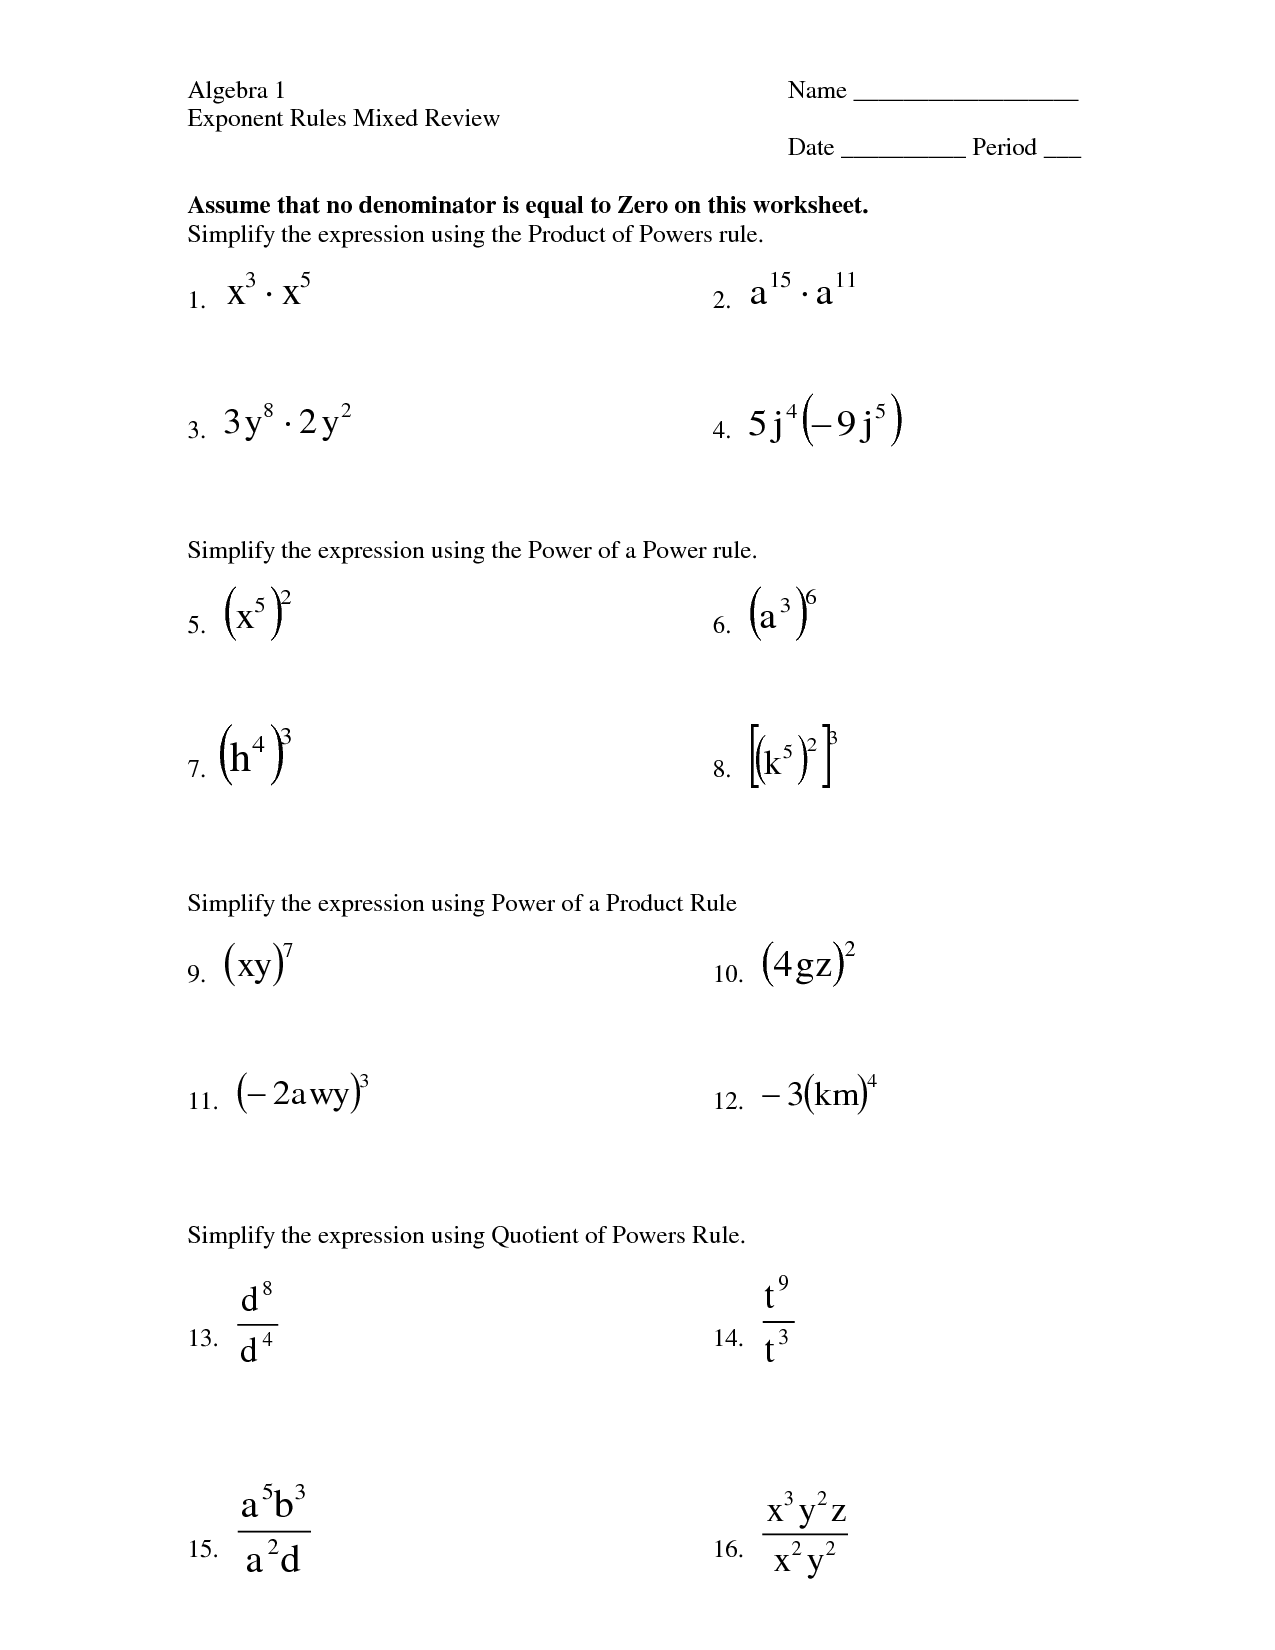 Evaluating Exponents Worksheet Answers